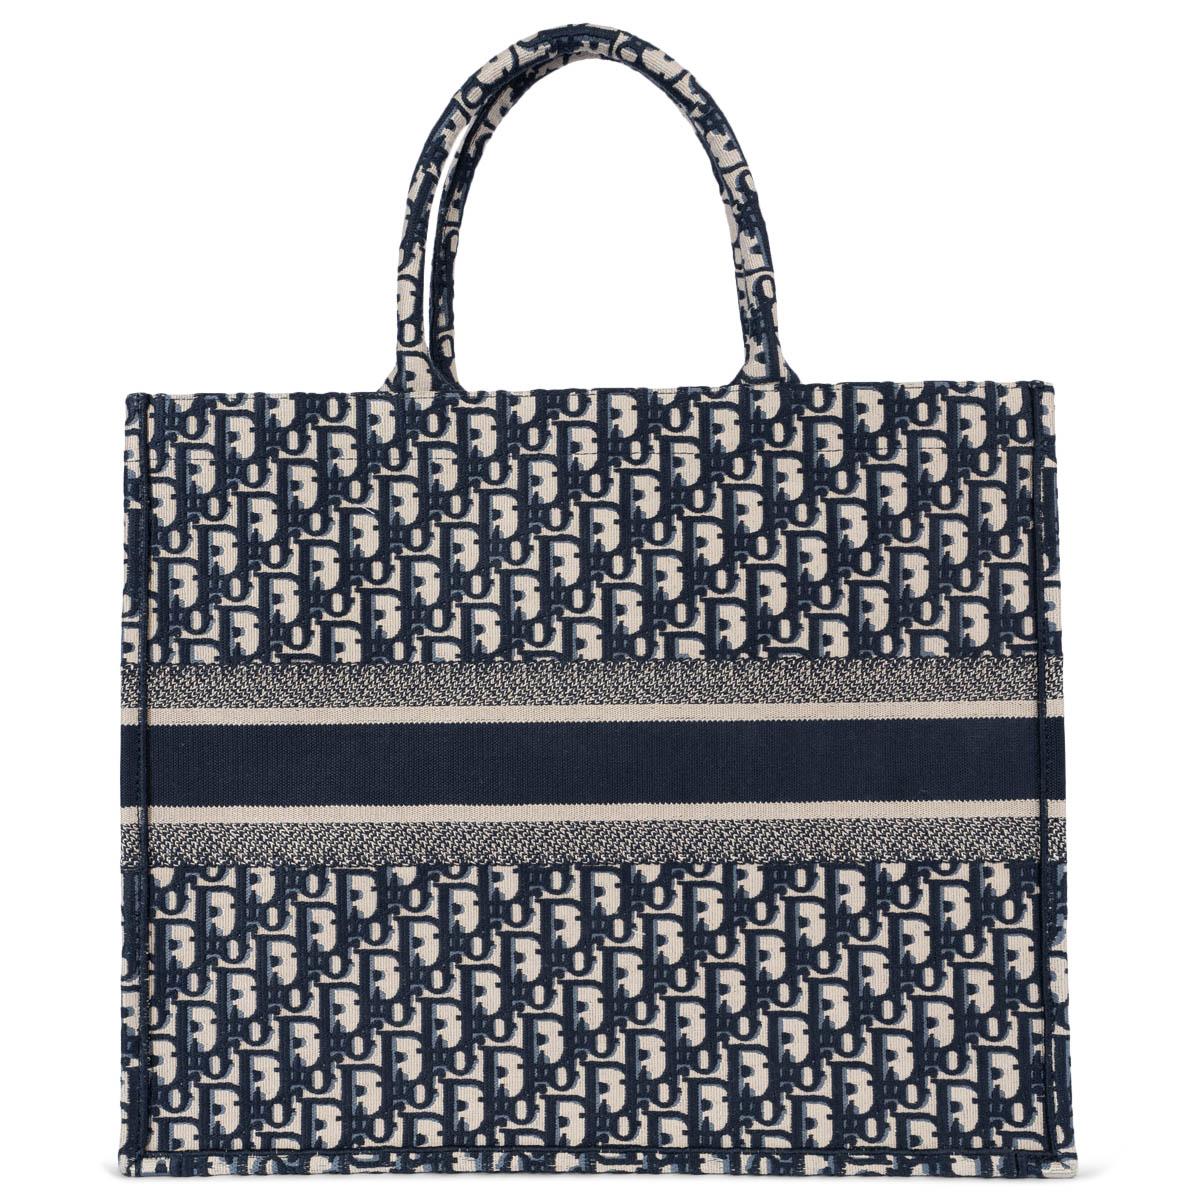 Women's CHRISTIAN DIOR navy blue Oblique canvas LARGE BOOK TOTE Bag For Sale